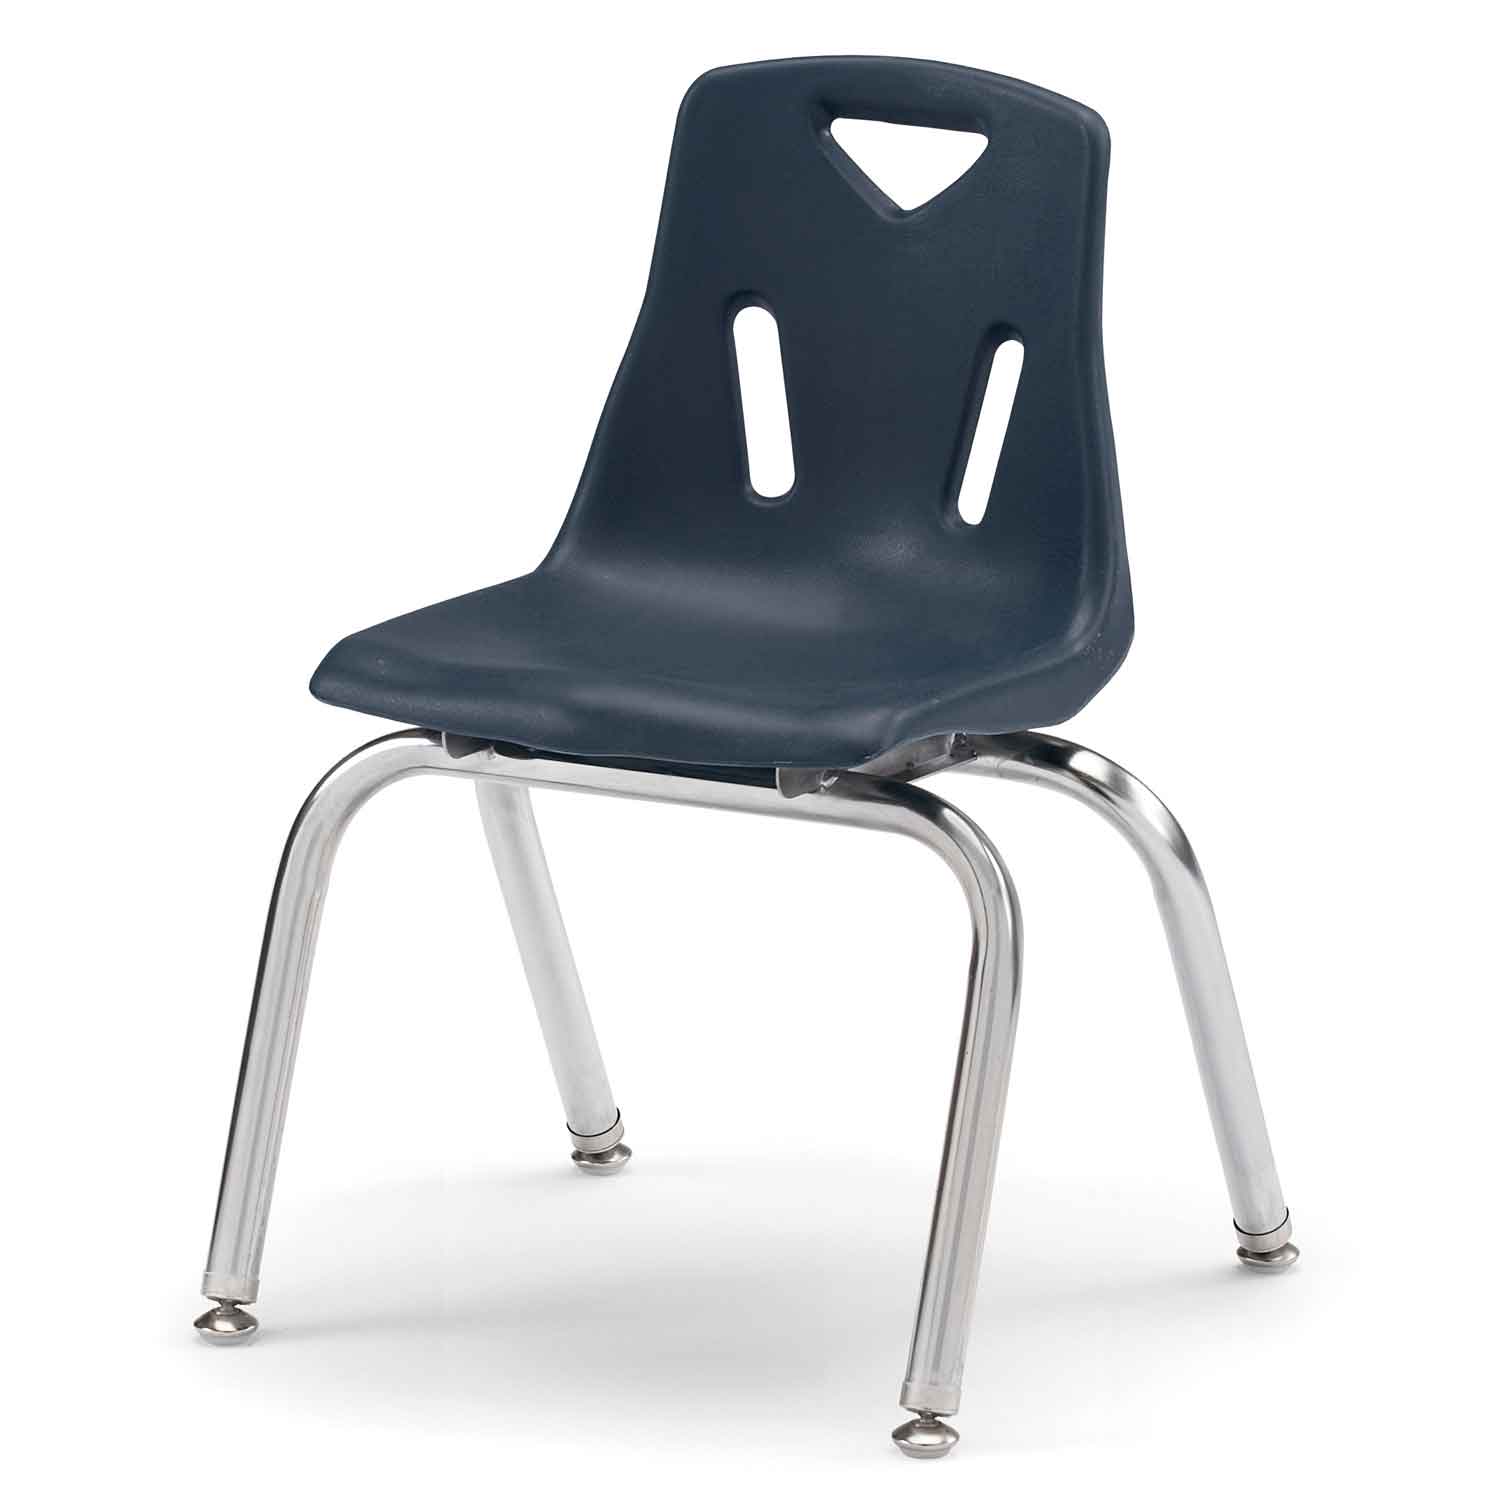 Berries® Plastic Chairs with Chrome Legs, Navy, 14"